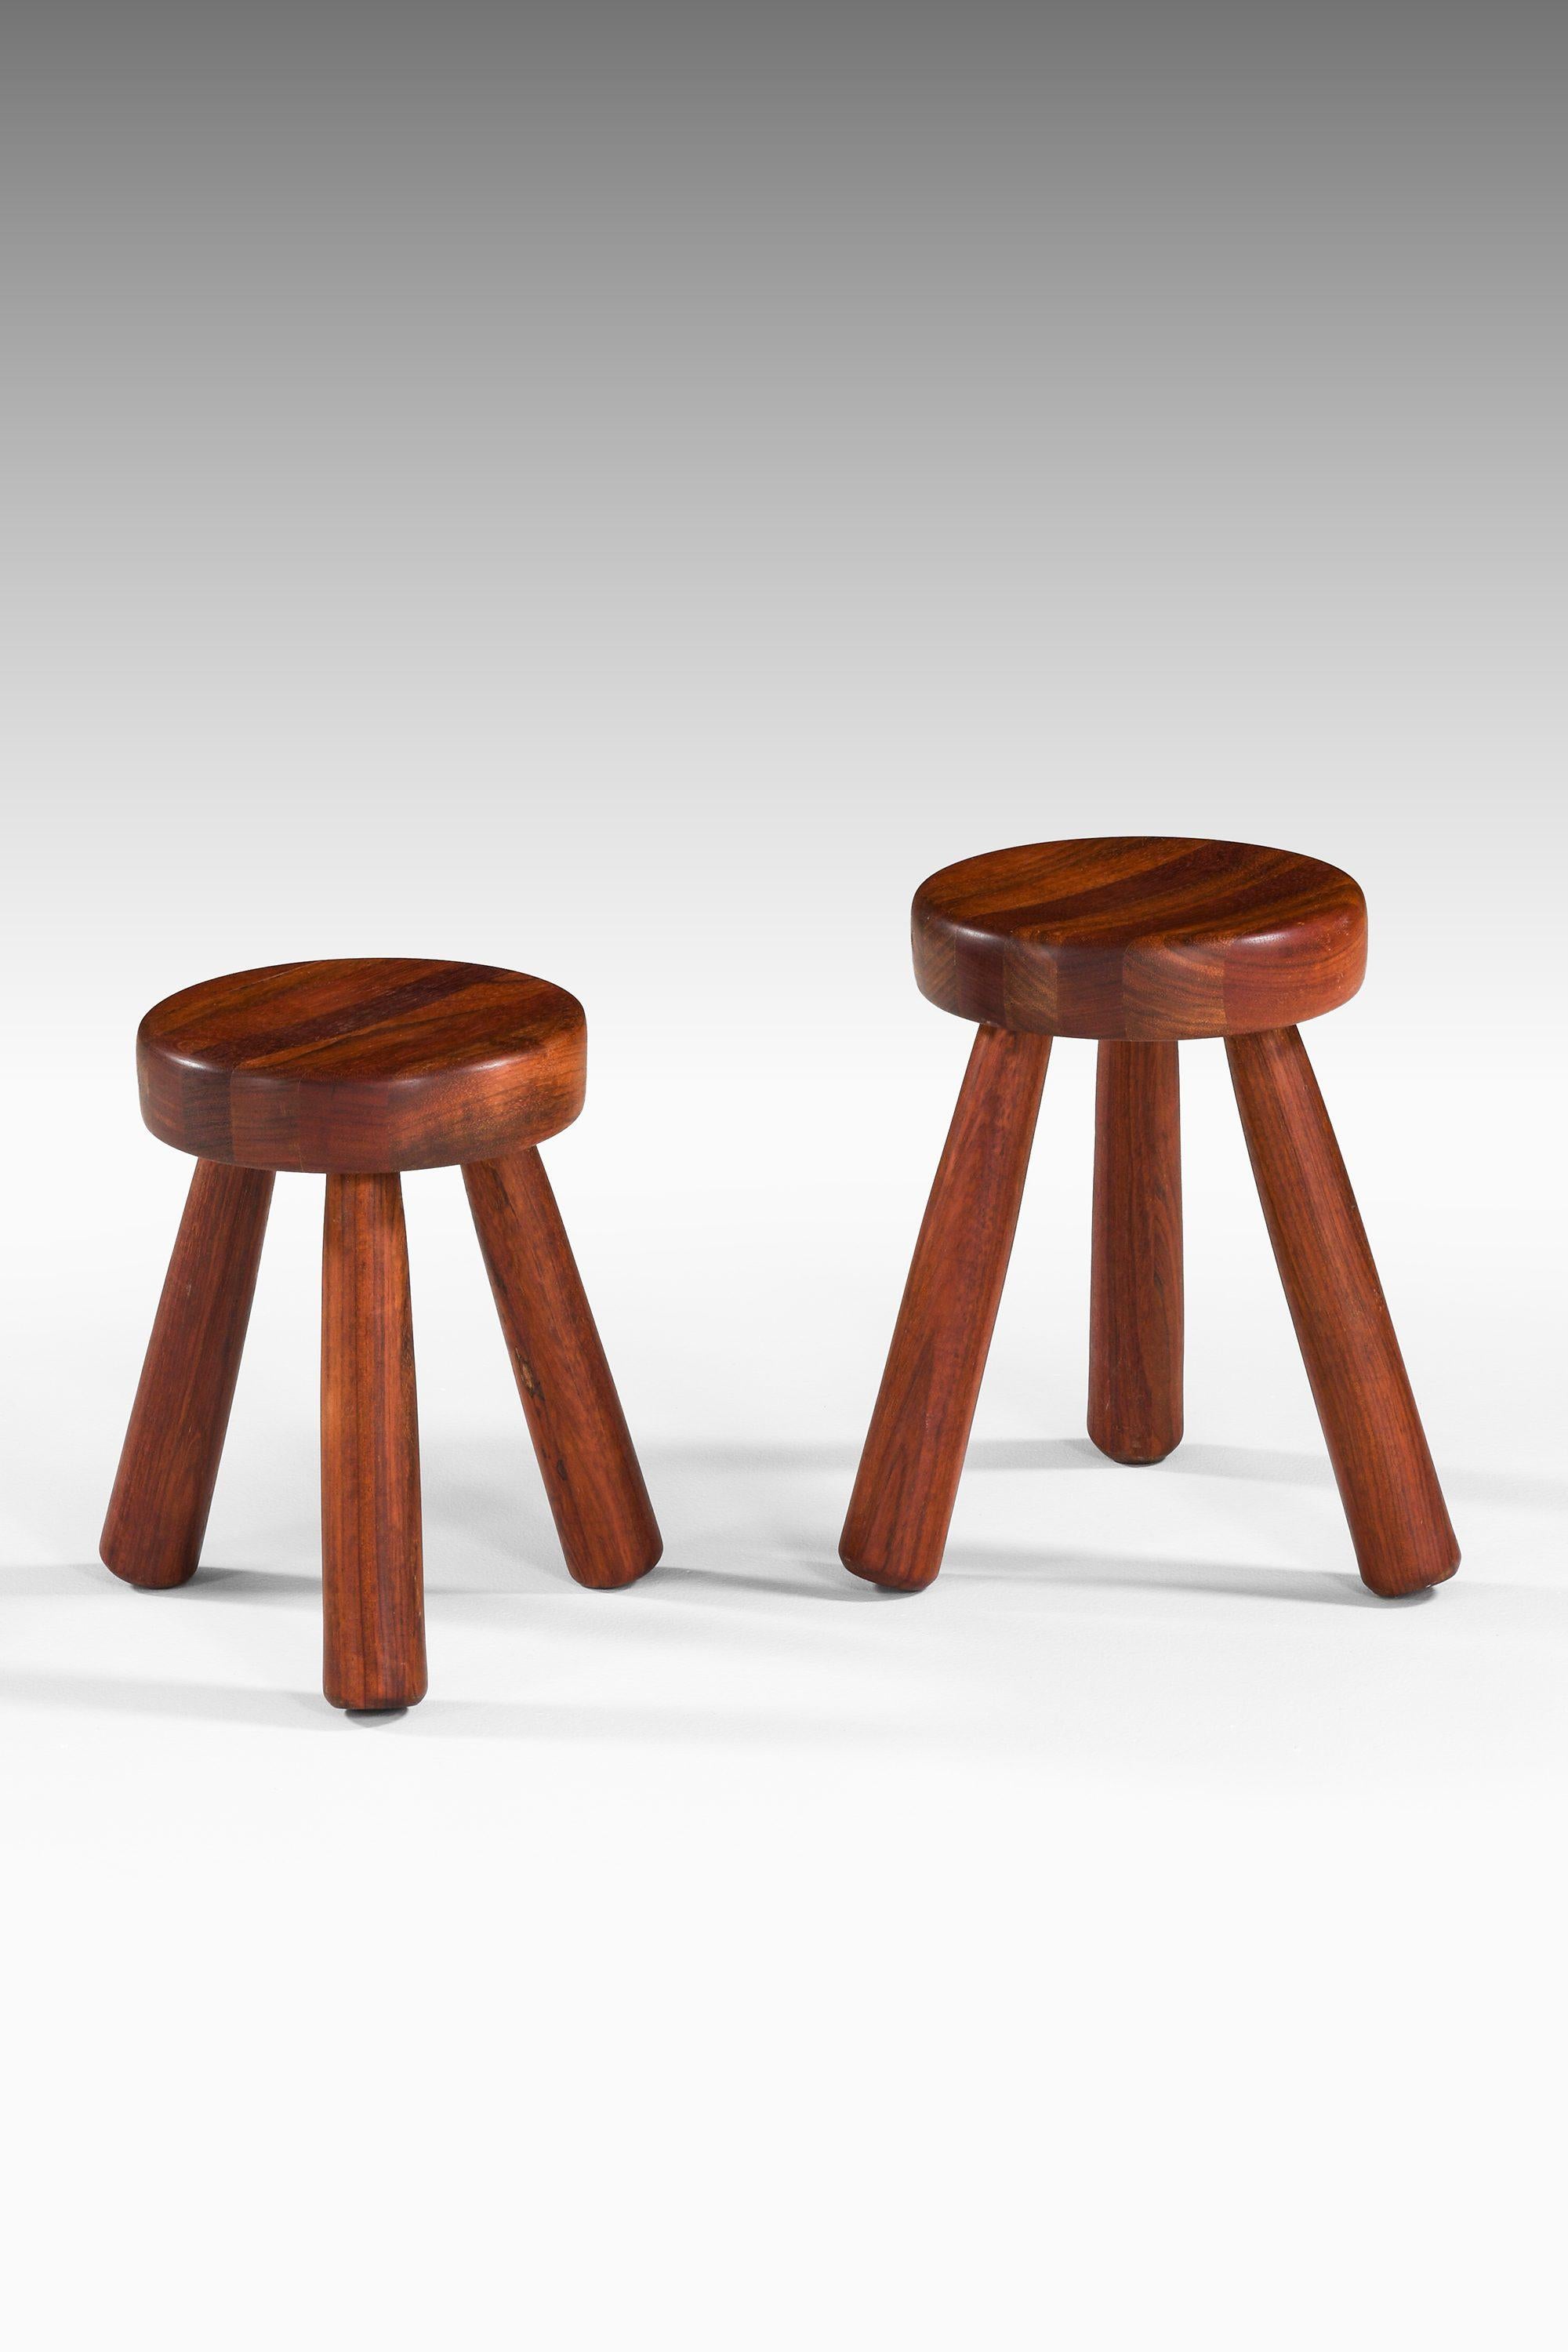 Scandinavian Modern Small Stool in Jatoba Wood by Ingvar Hildingsson, 1980's For Sale